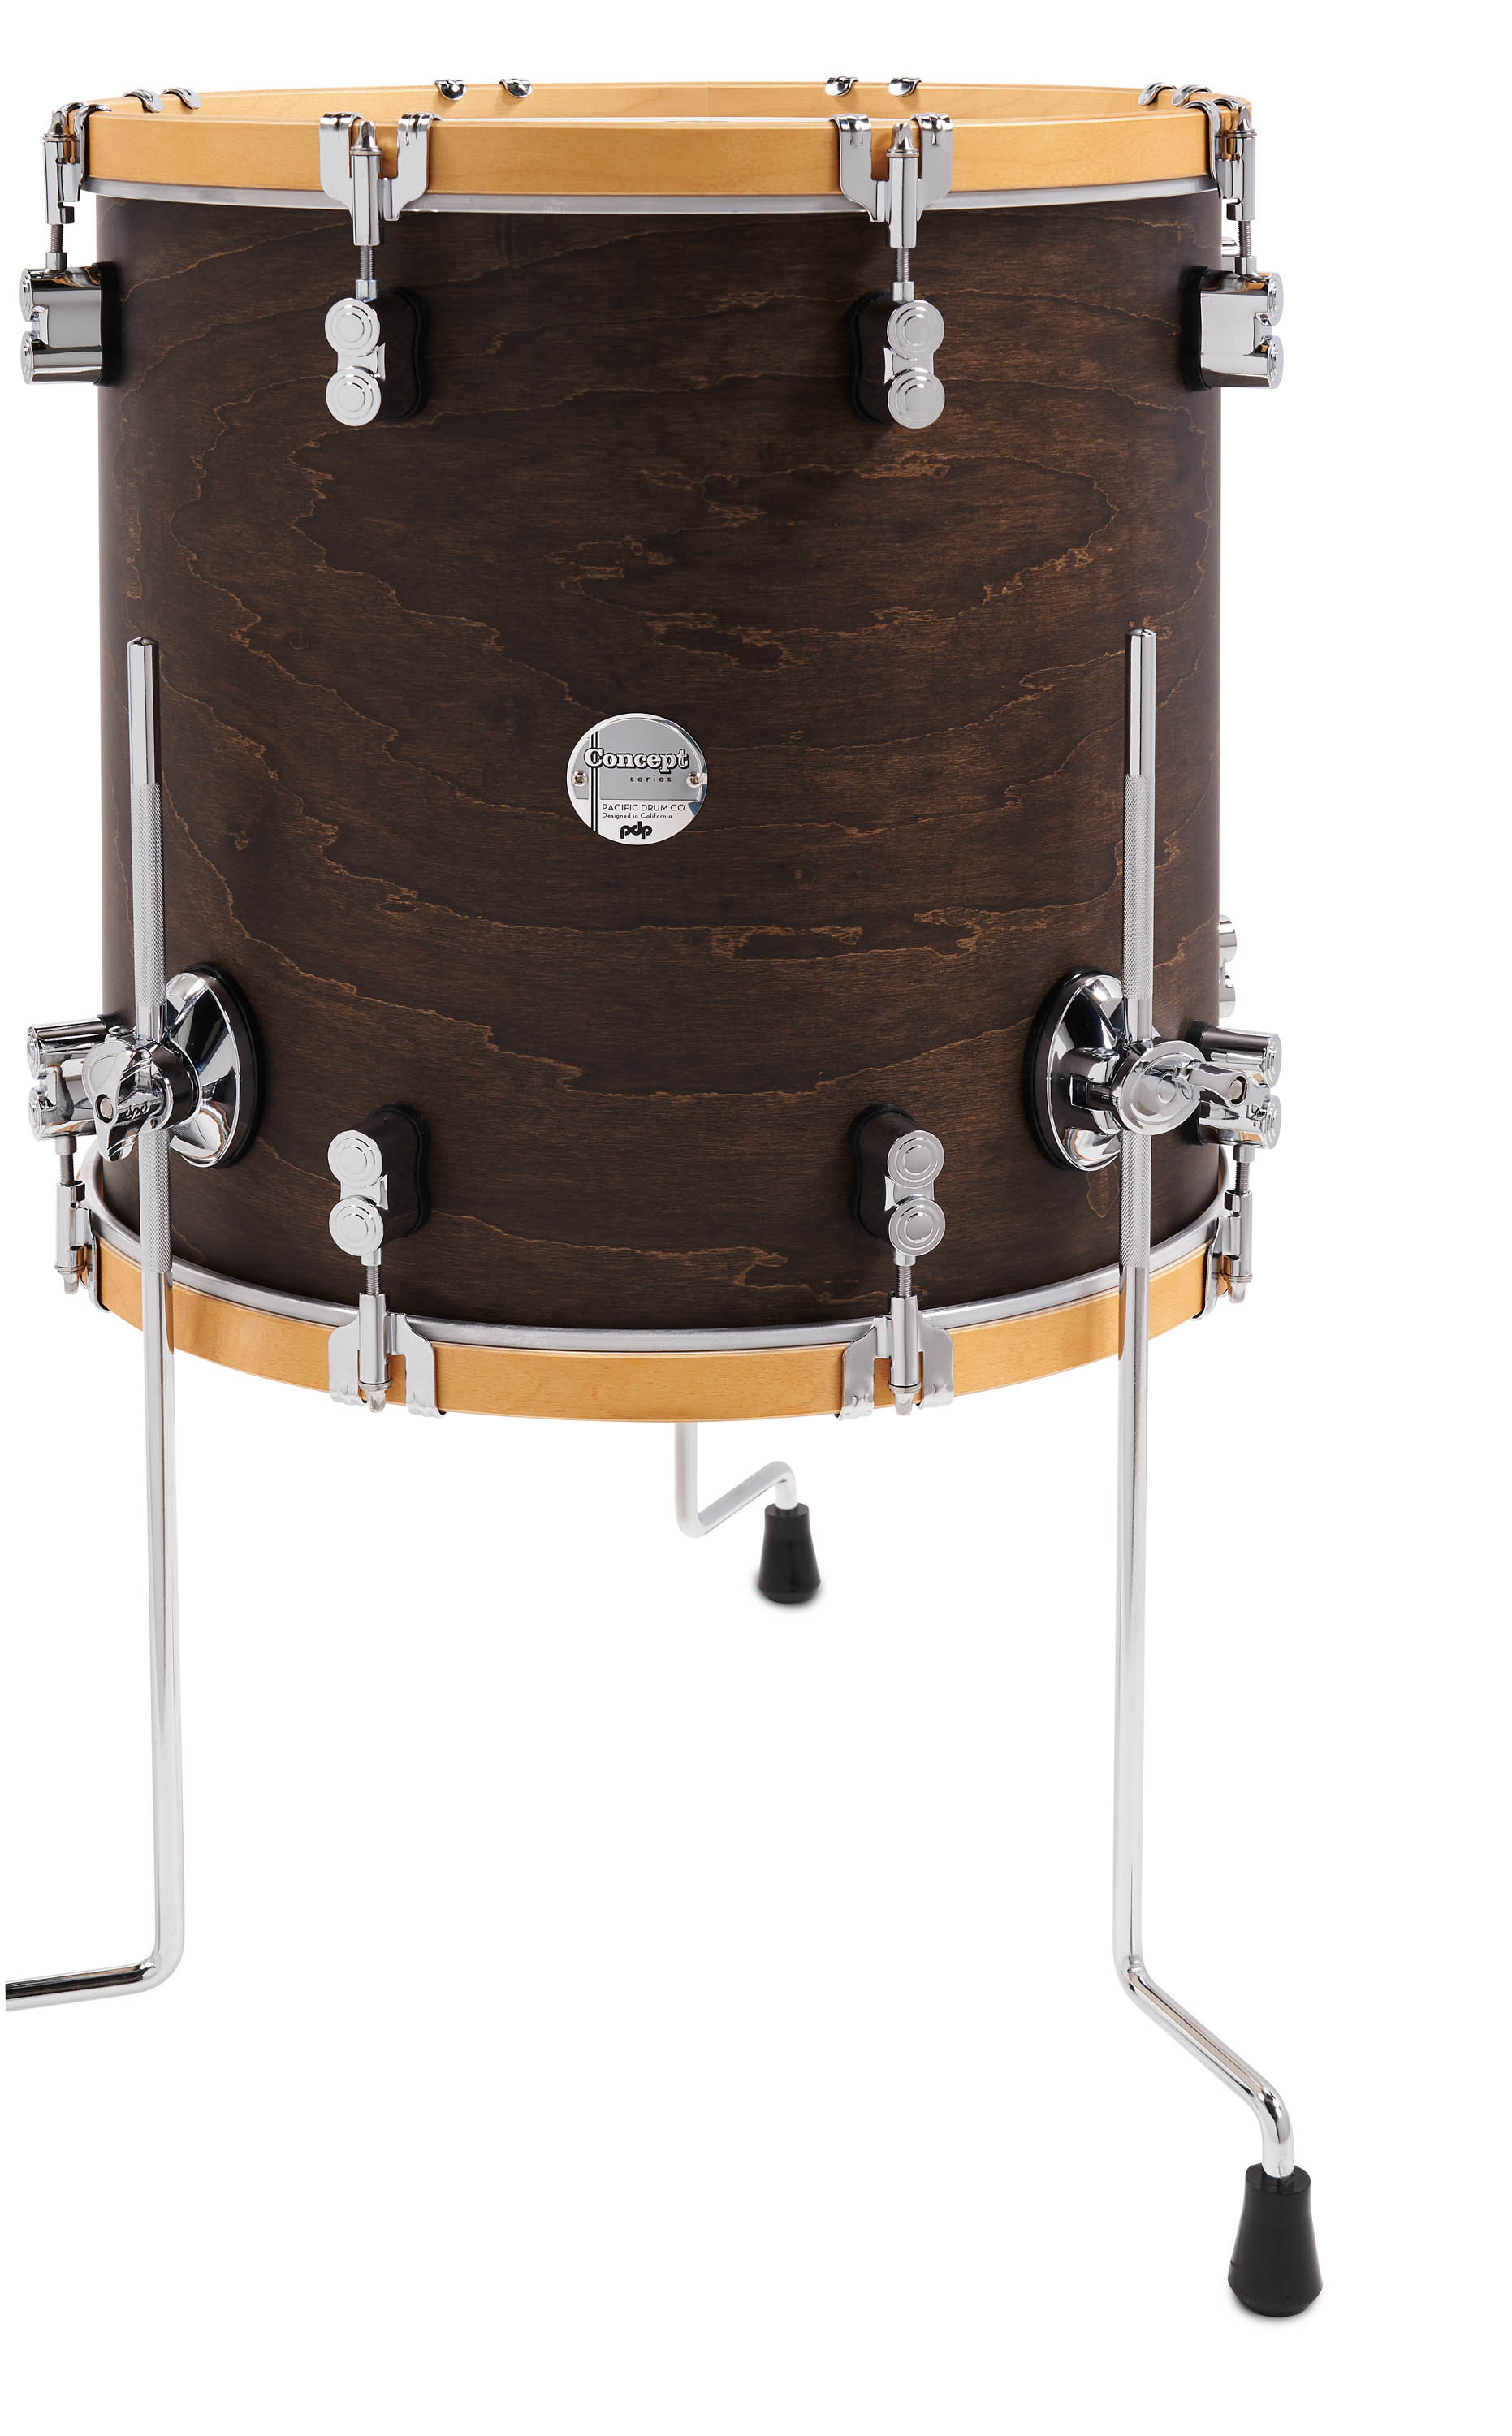 PDP Concept Classic Series 3-Piece Maple Shell Pack, Walnut with Natural Hoops and Chrome Hardware; 9x13, 16x16, 14x26